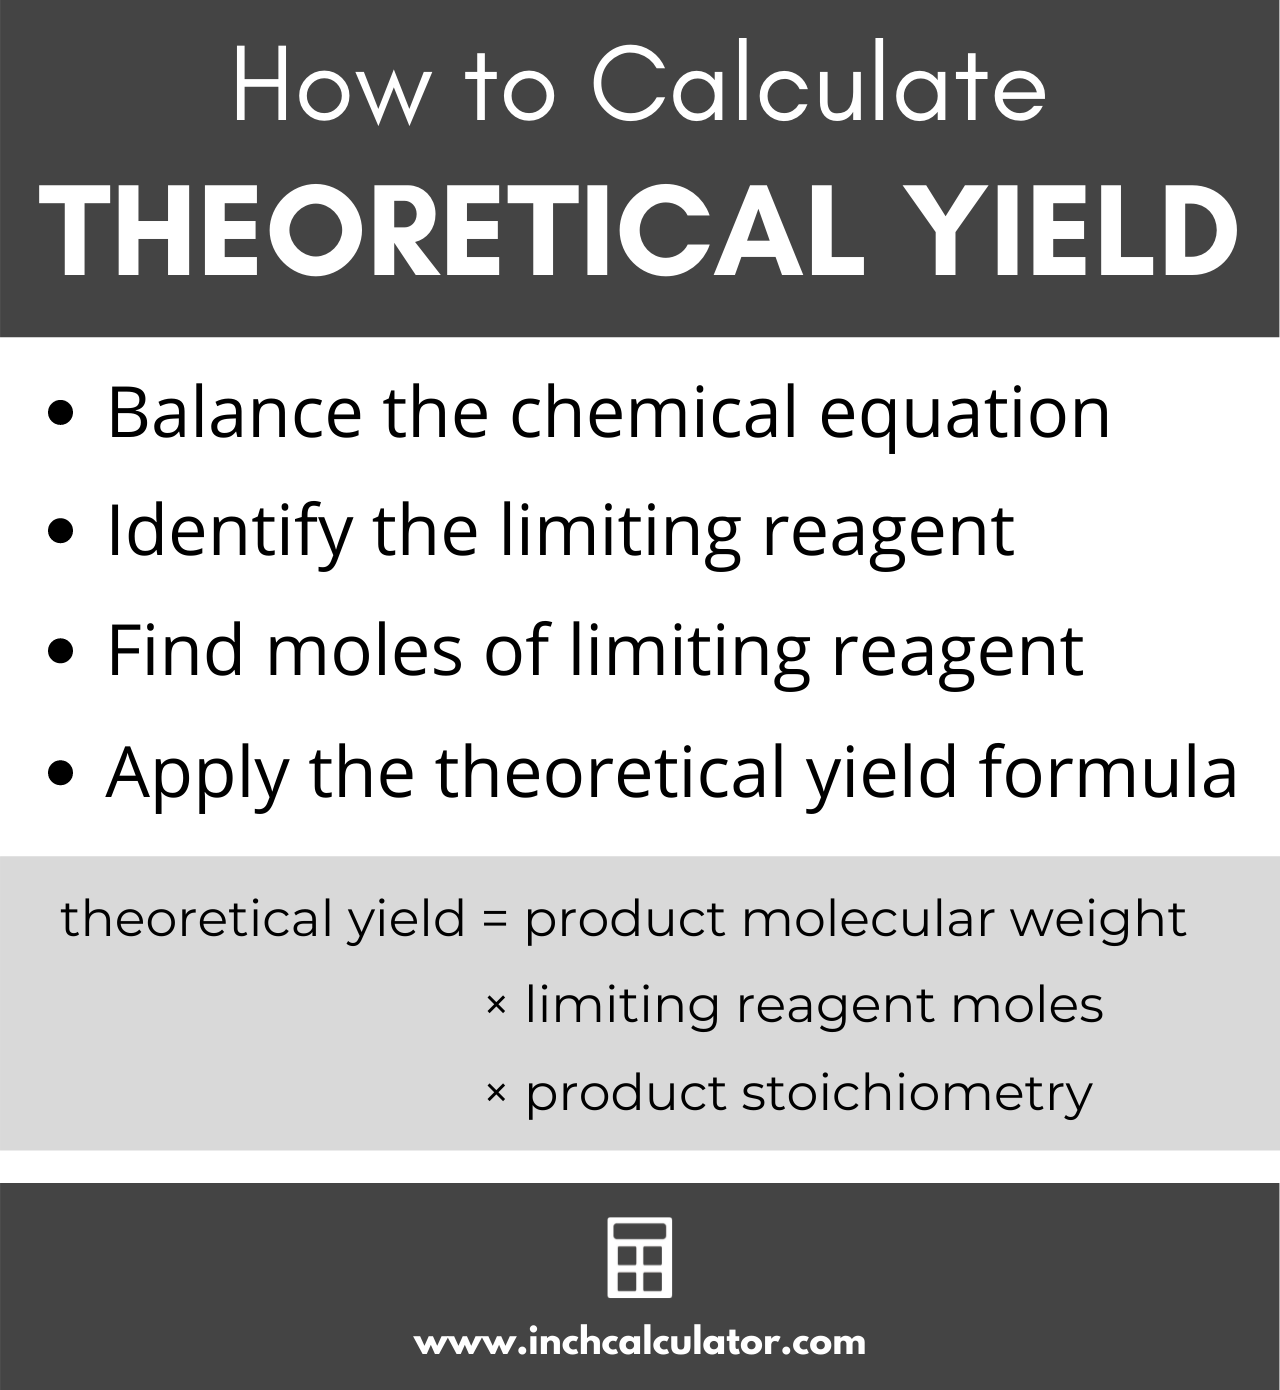 graphic illustrating the four steps to calculating theoretical yield